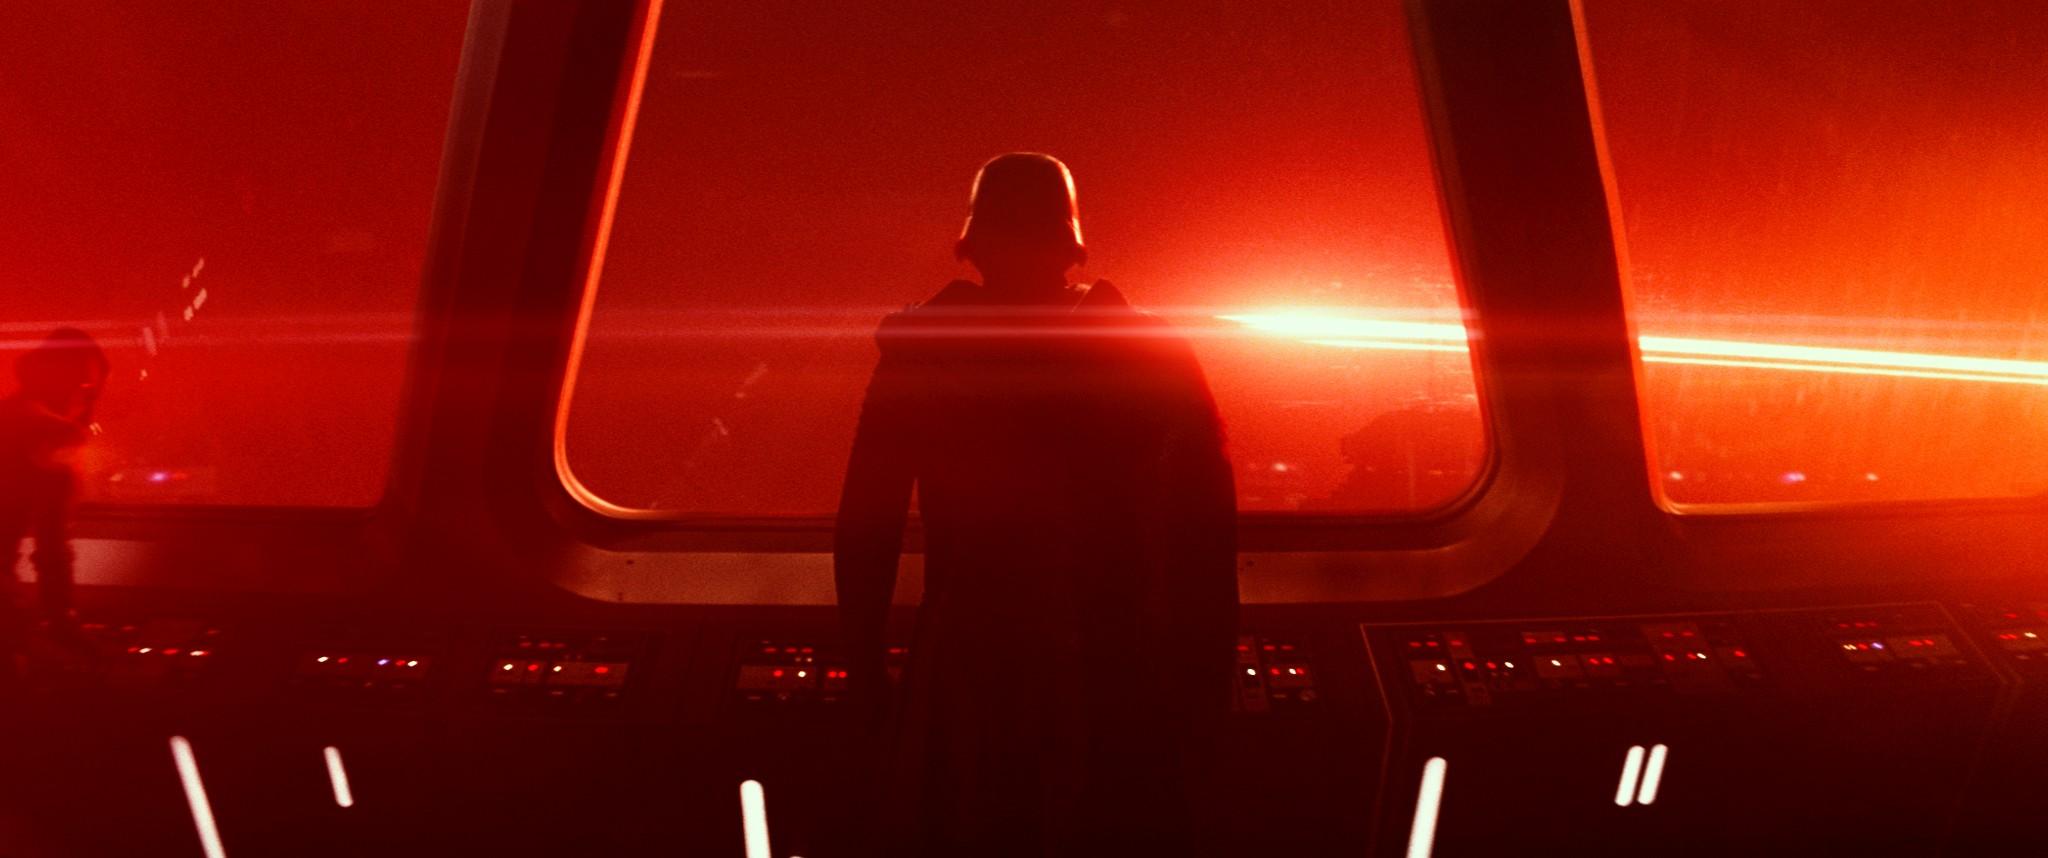 Star Wars Episode VII: The Force Awakens Wallpapers and Backgrounds